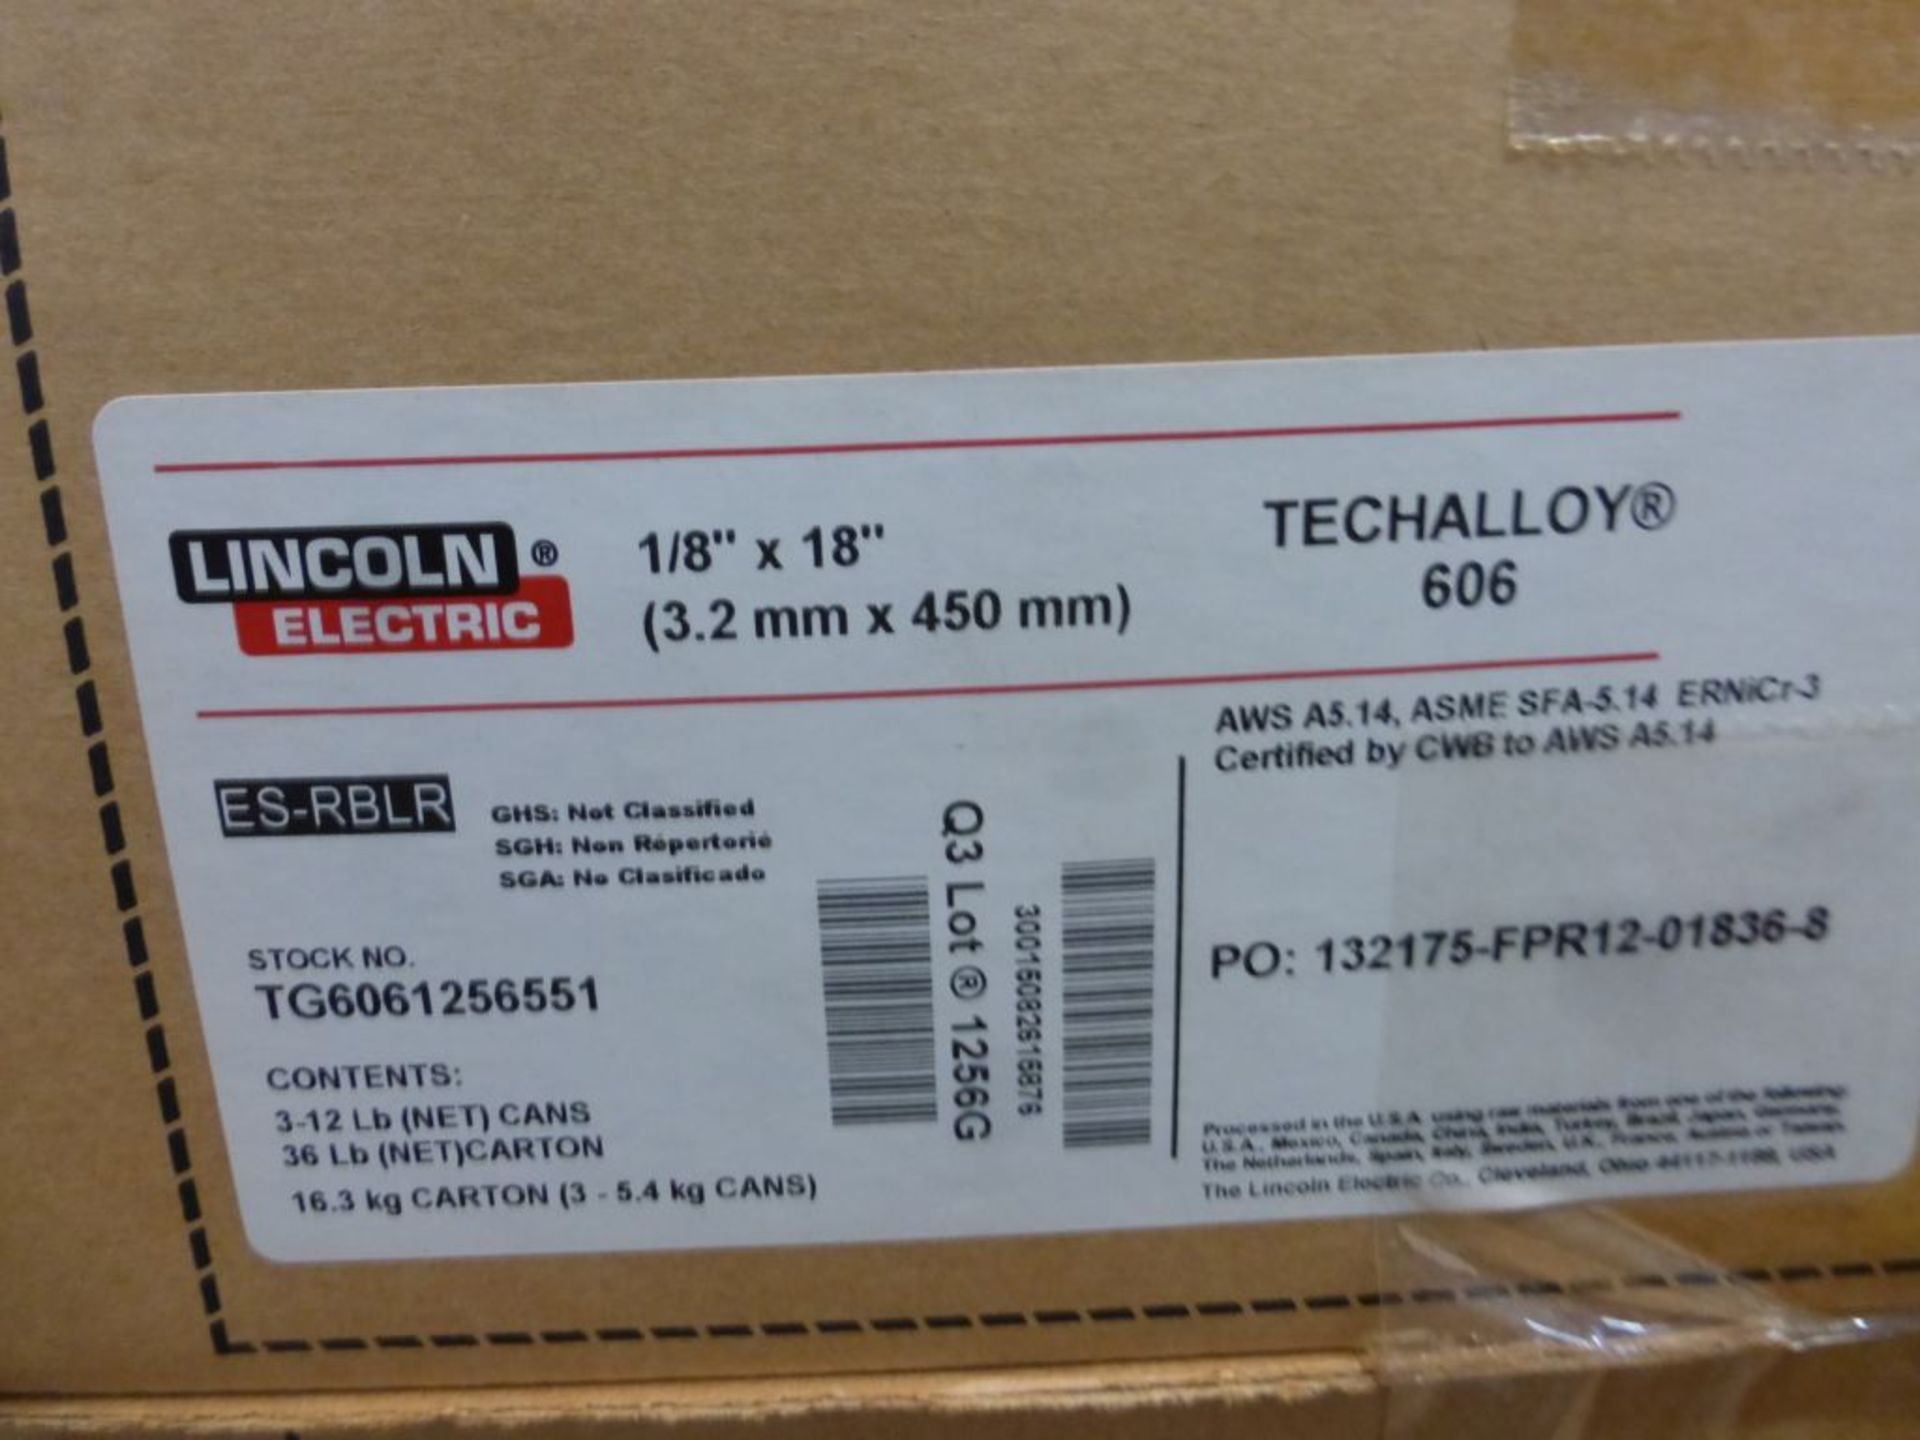 Lot of (8) Boxes of Lincoln Electric Techalloy 606 Welding Wire | Stock No. TG6061256551; 1/8" x - Image 5 of 8